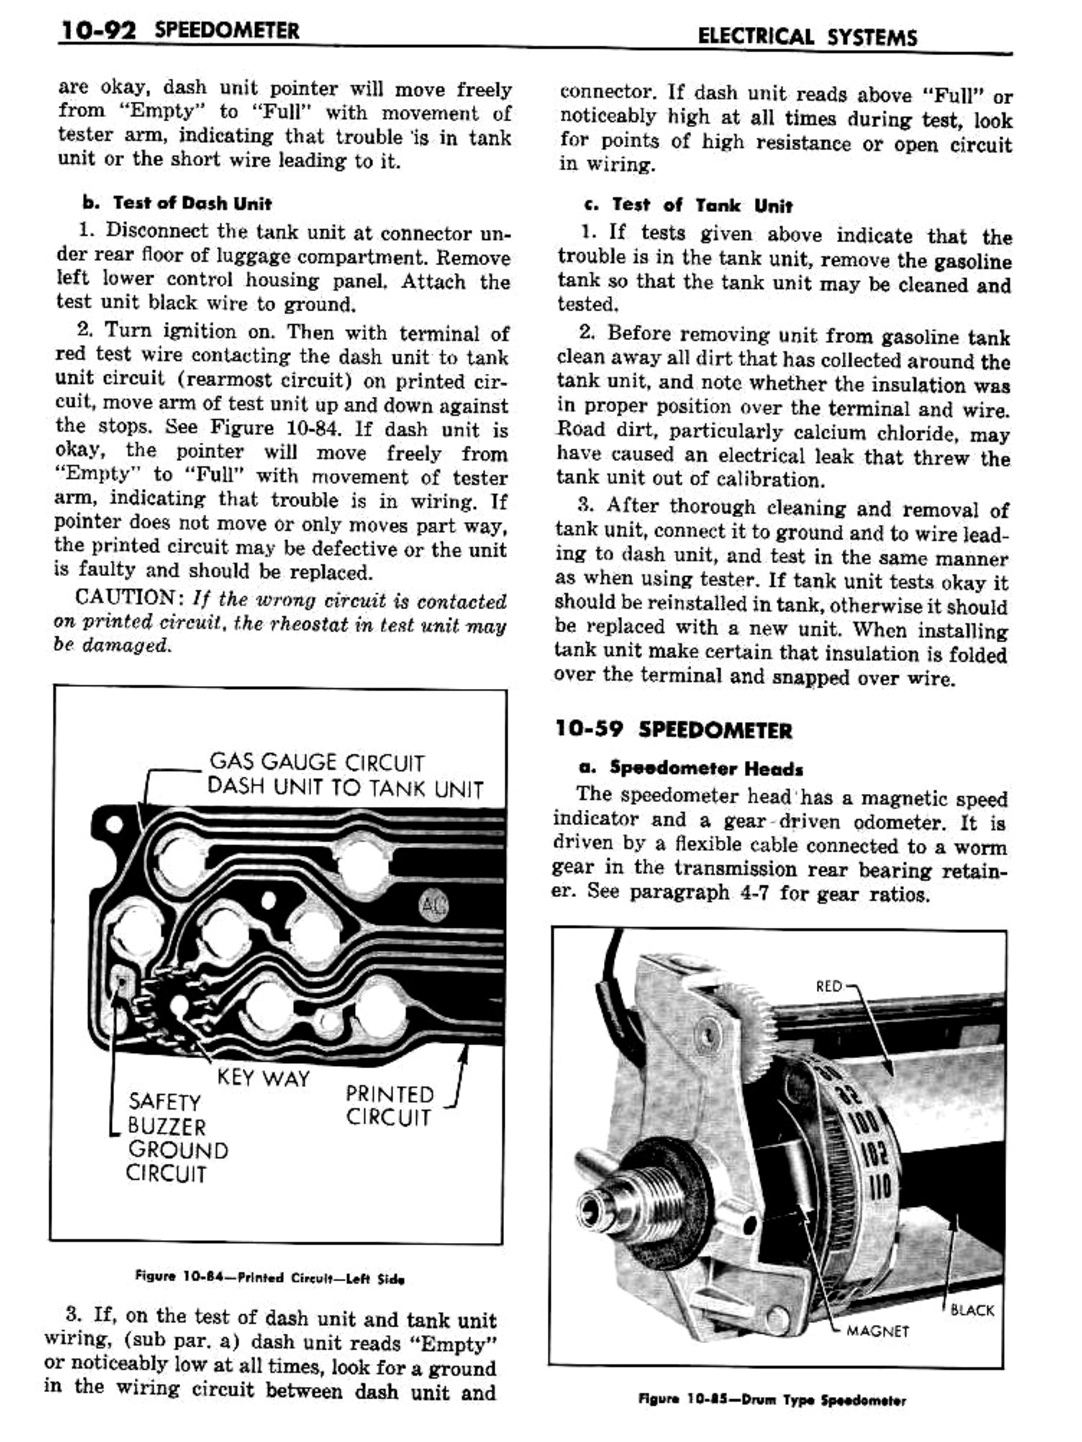 n_11 1960 Buick Shop Manual - Electrical Systems-092-092.jpg